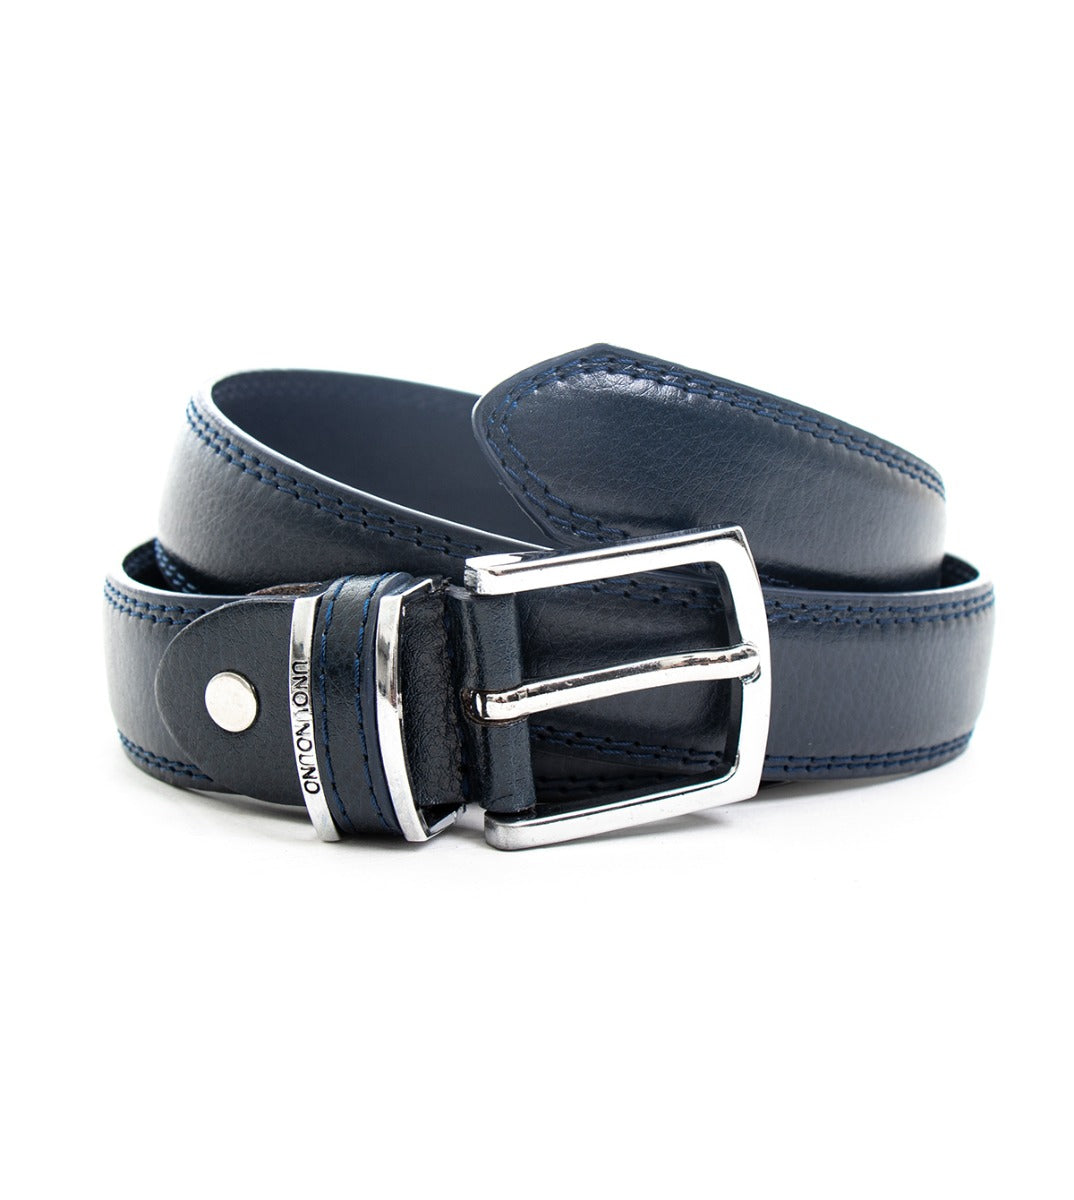 Wide Men's Belt Adjustable Metal Buckle Blue Textured Faux Leather GIOSAL-A2083A